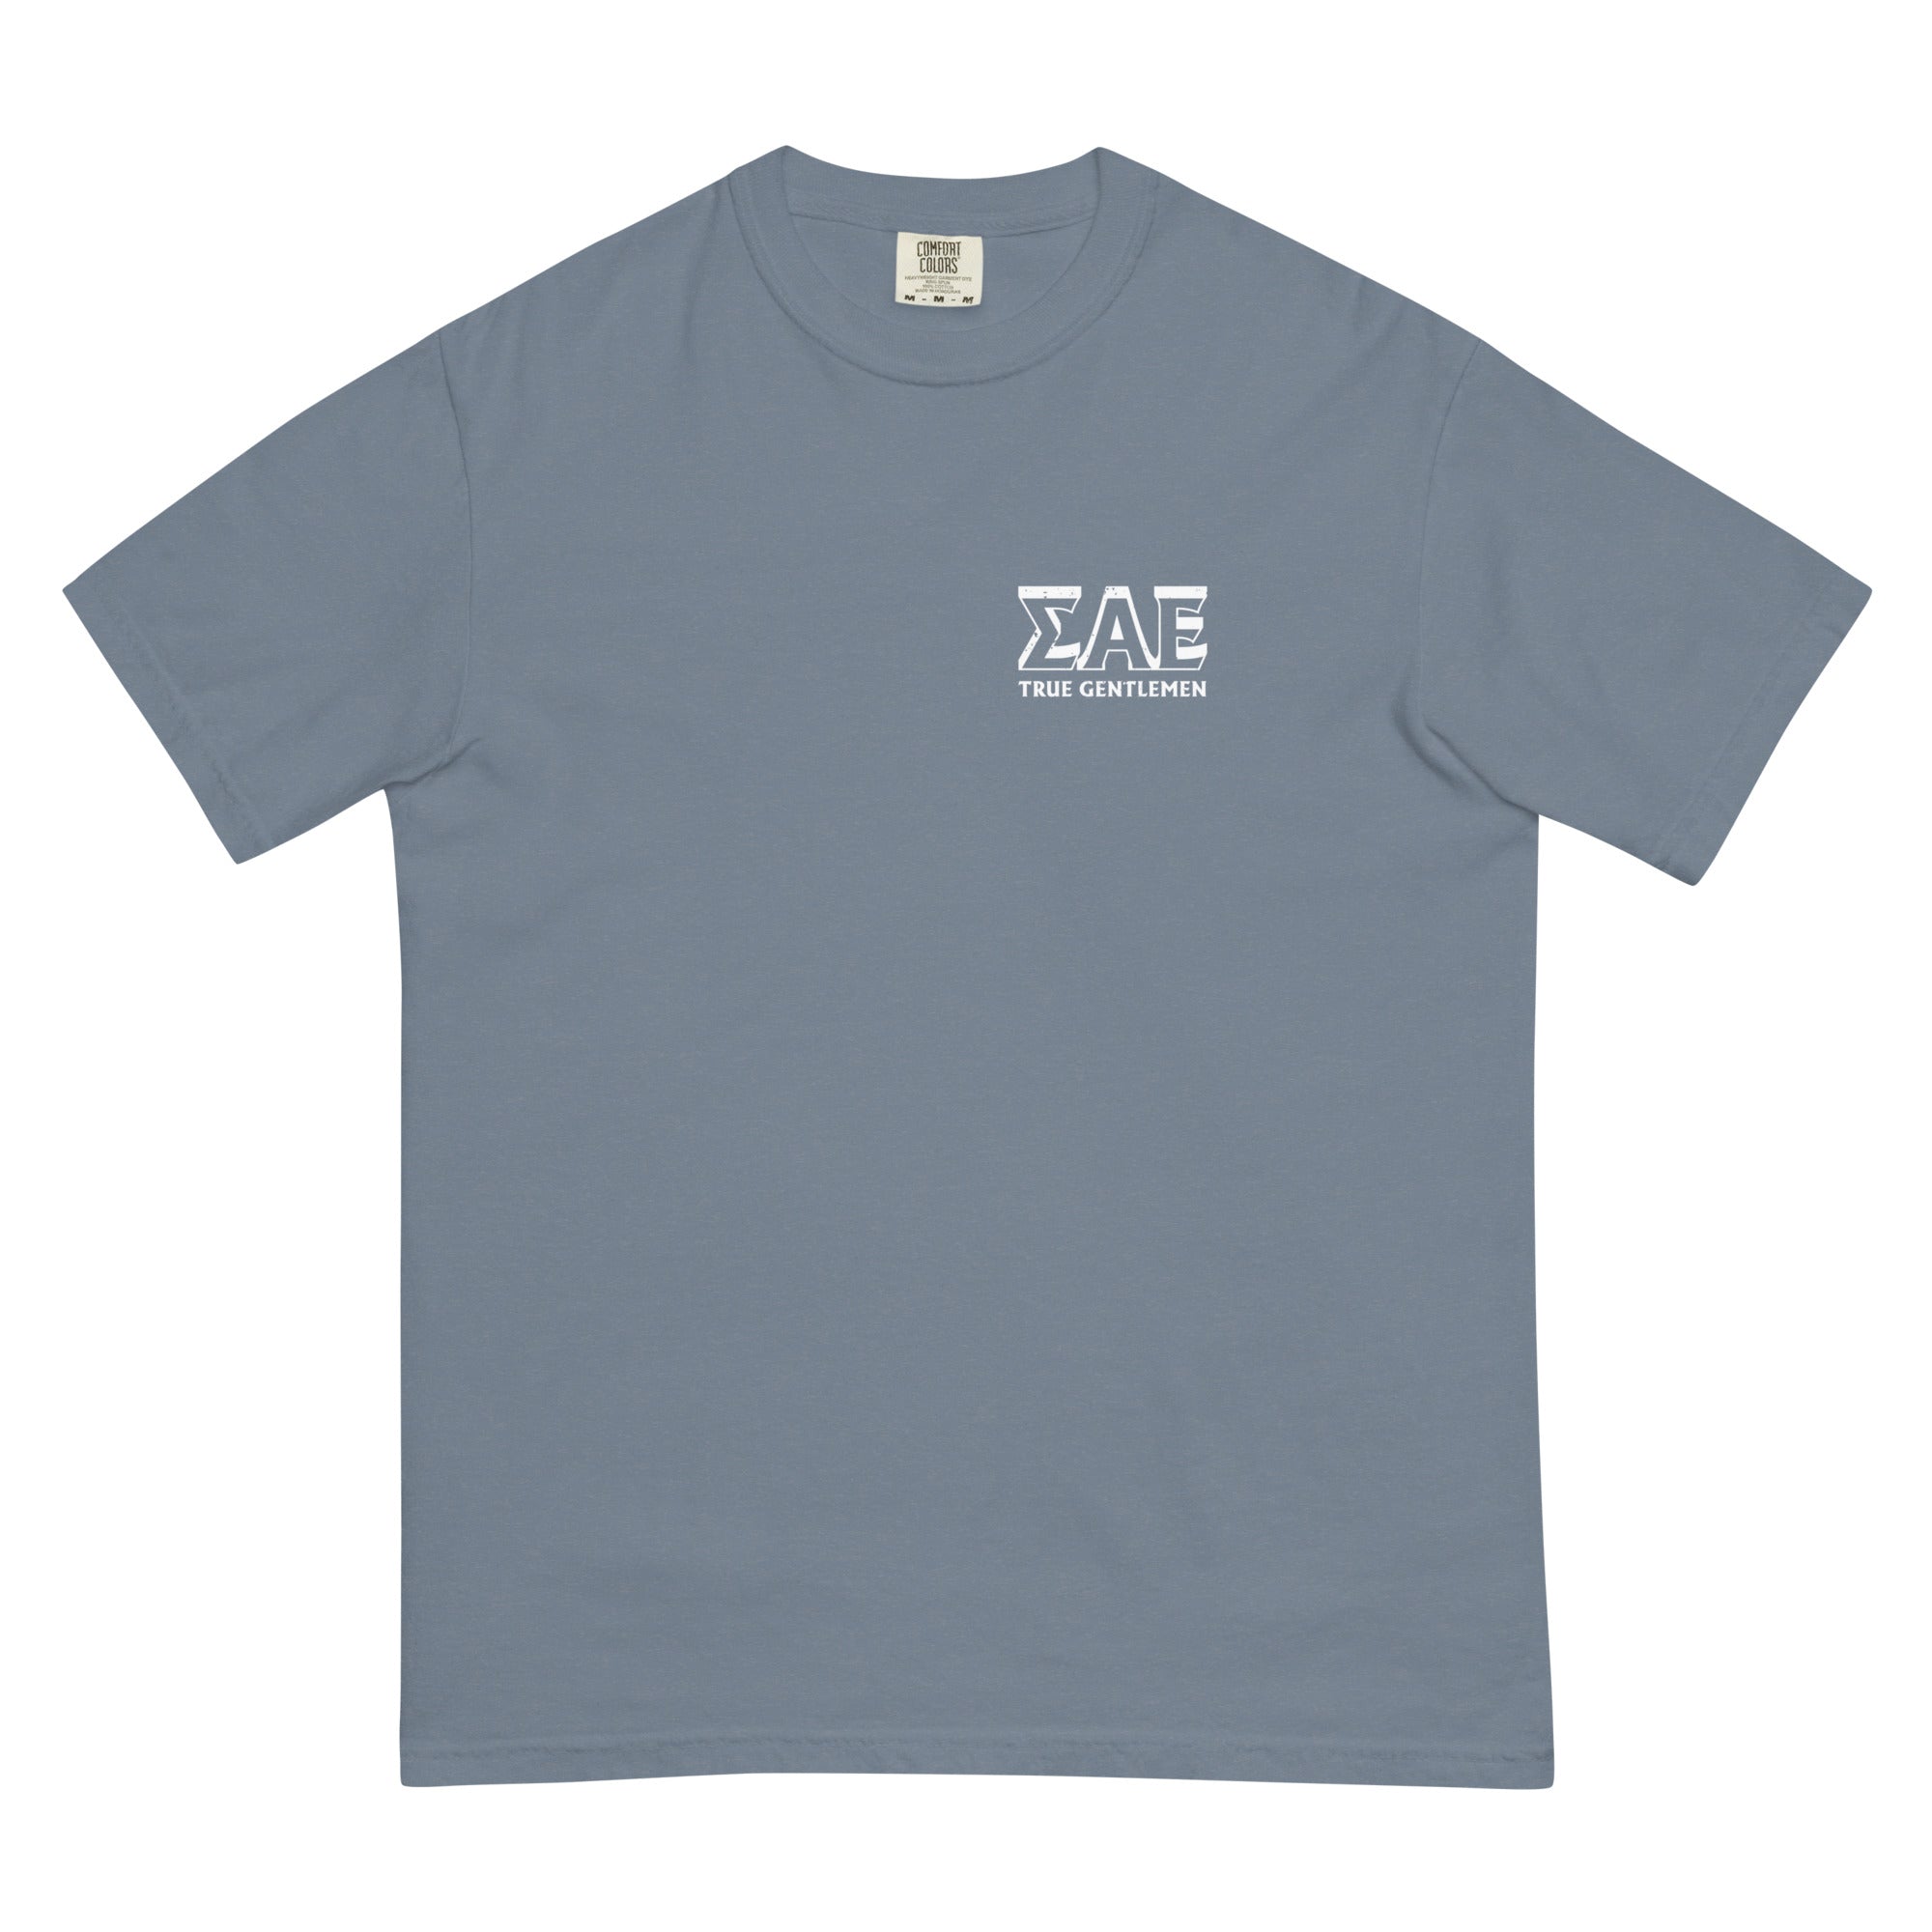 LIMITED RELEASE: SAE Fourth of July - The Sigma Alpha Epsilon Store